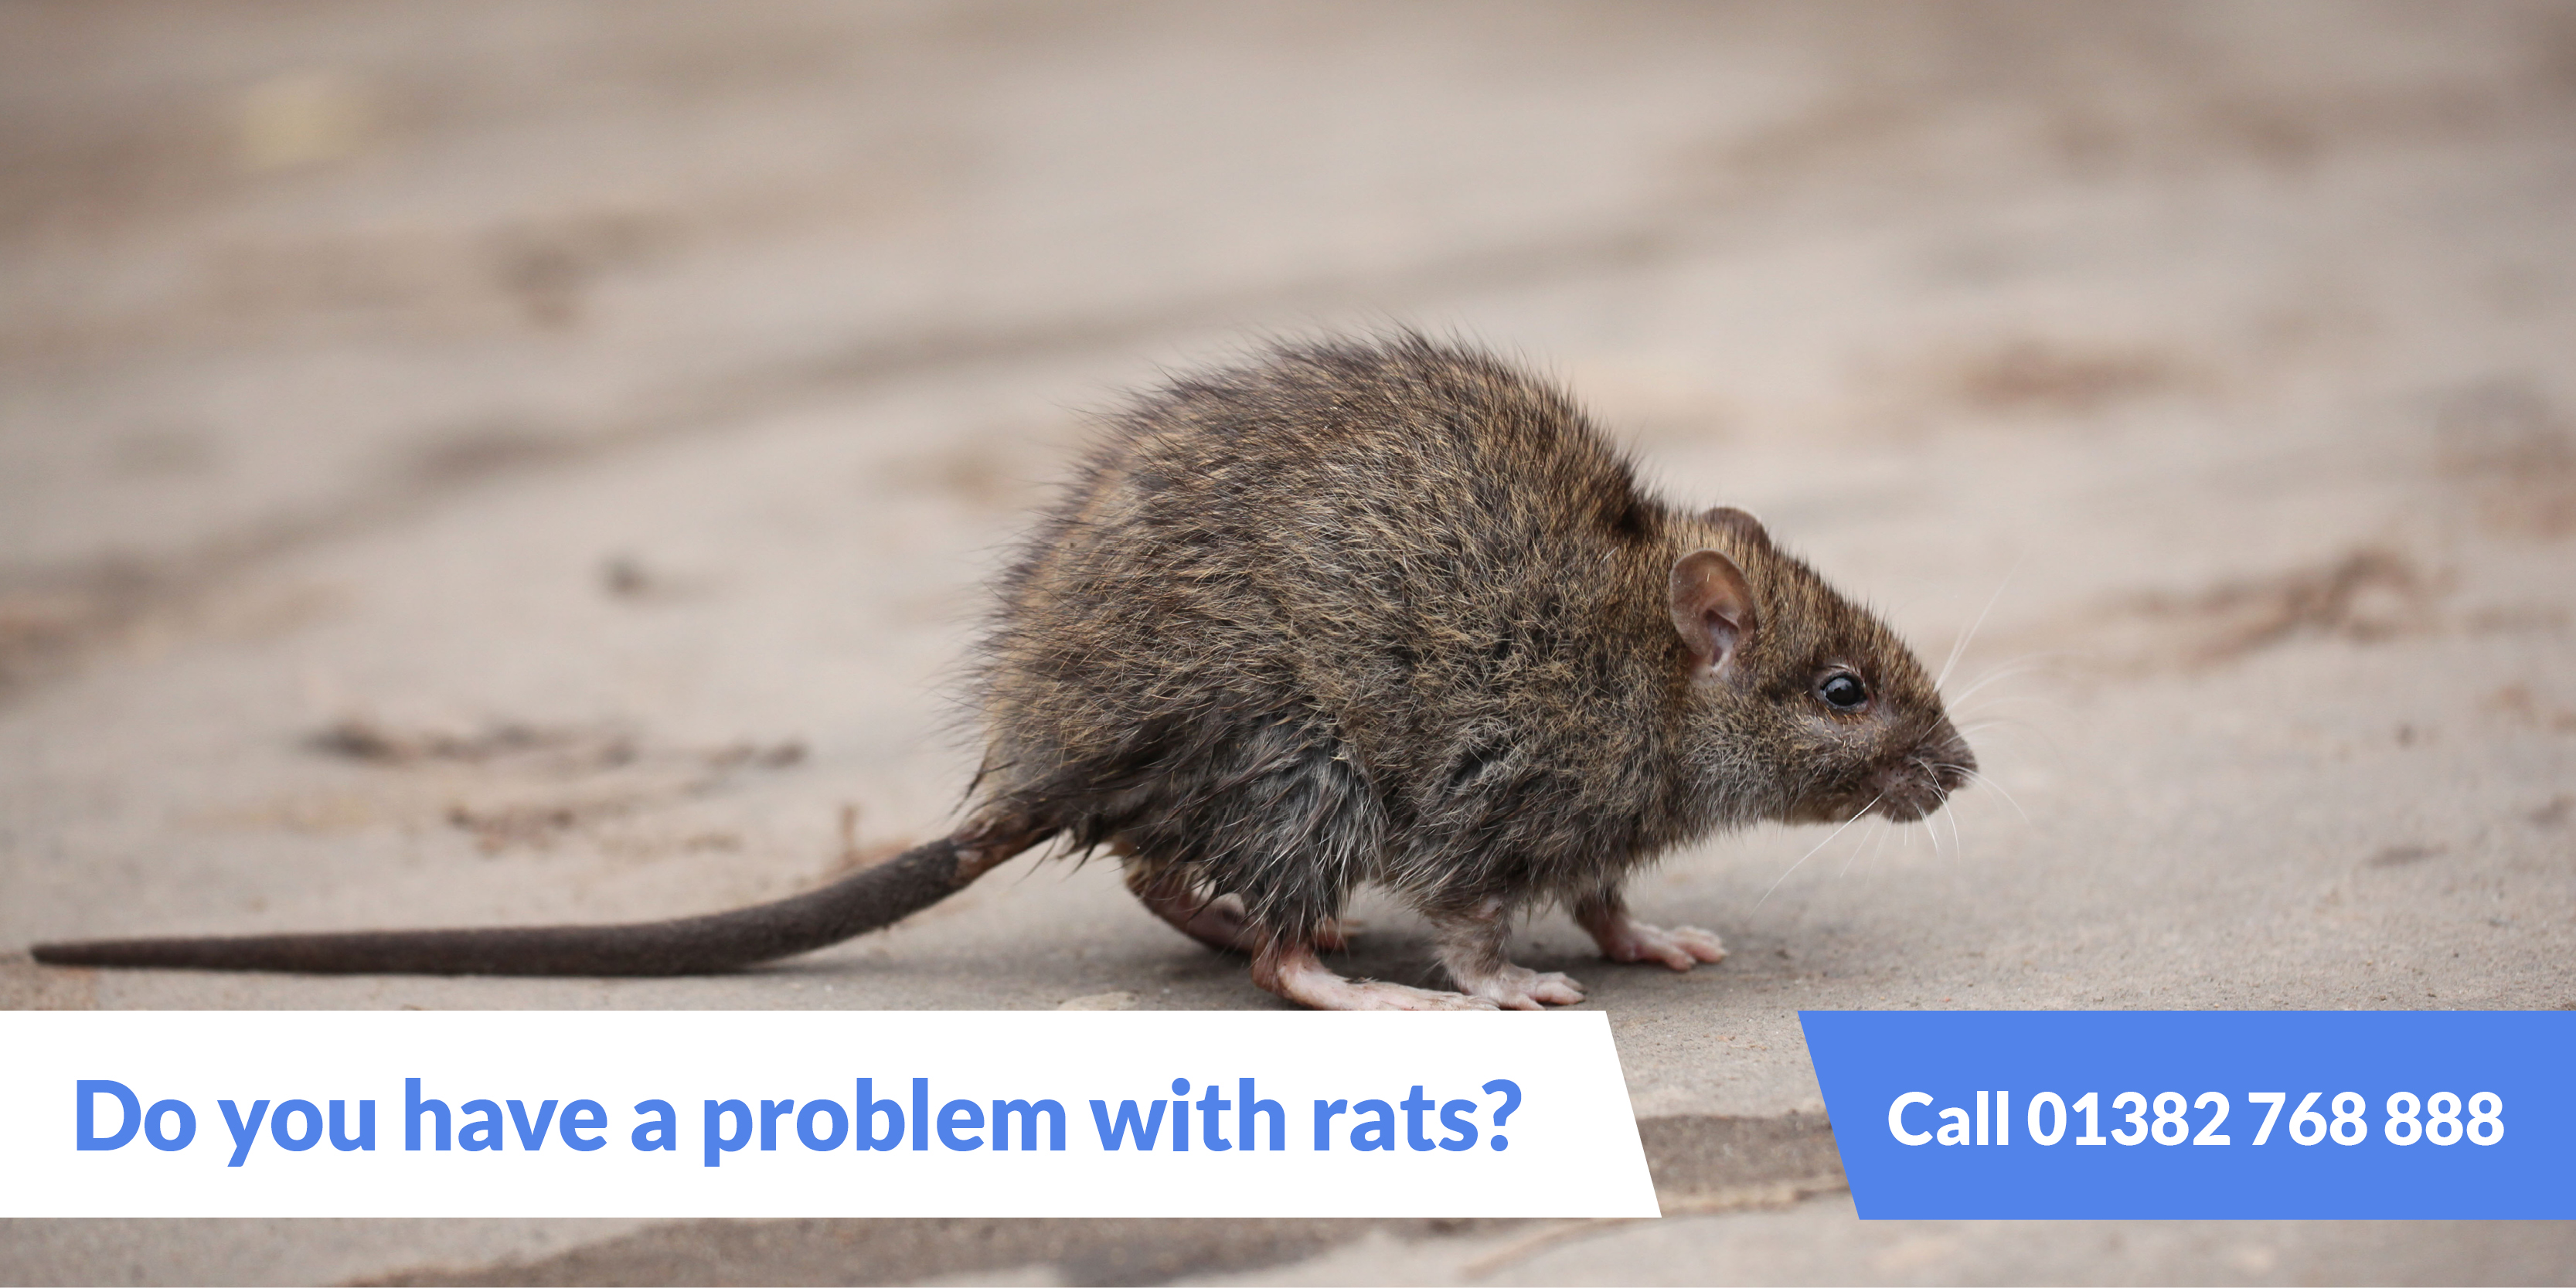 Rat Control Dundee  How to Get Rid of Rats